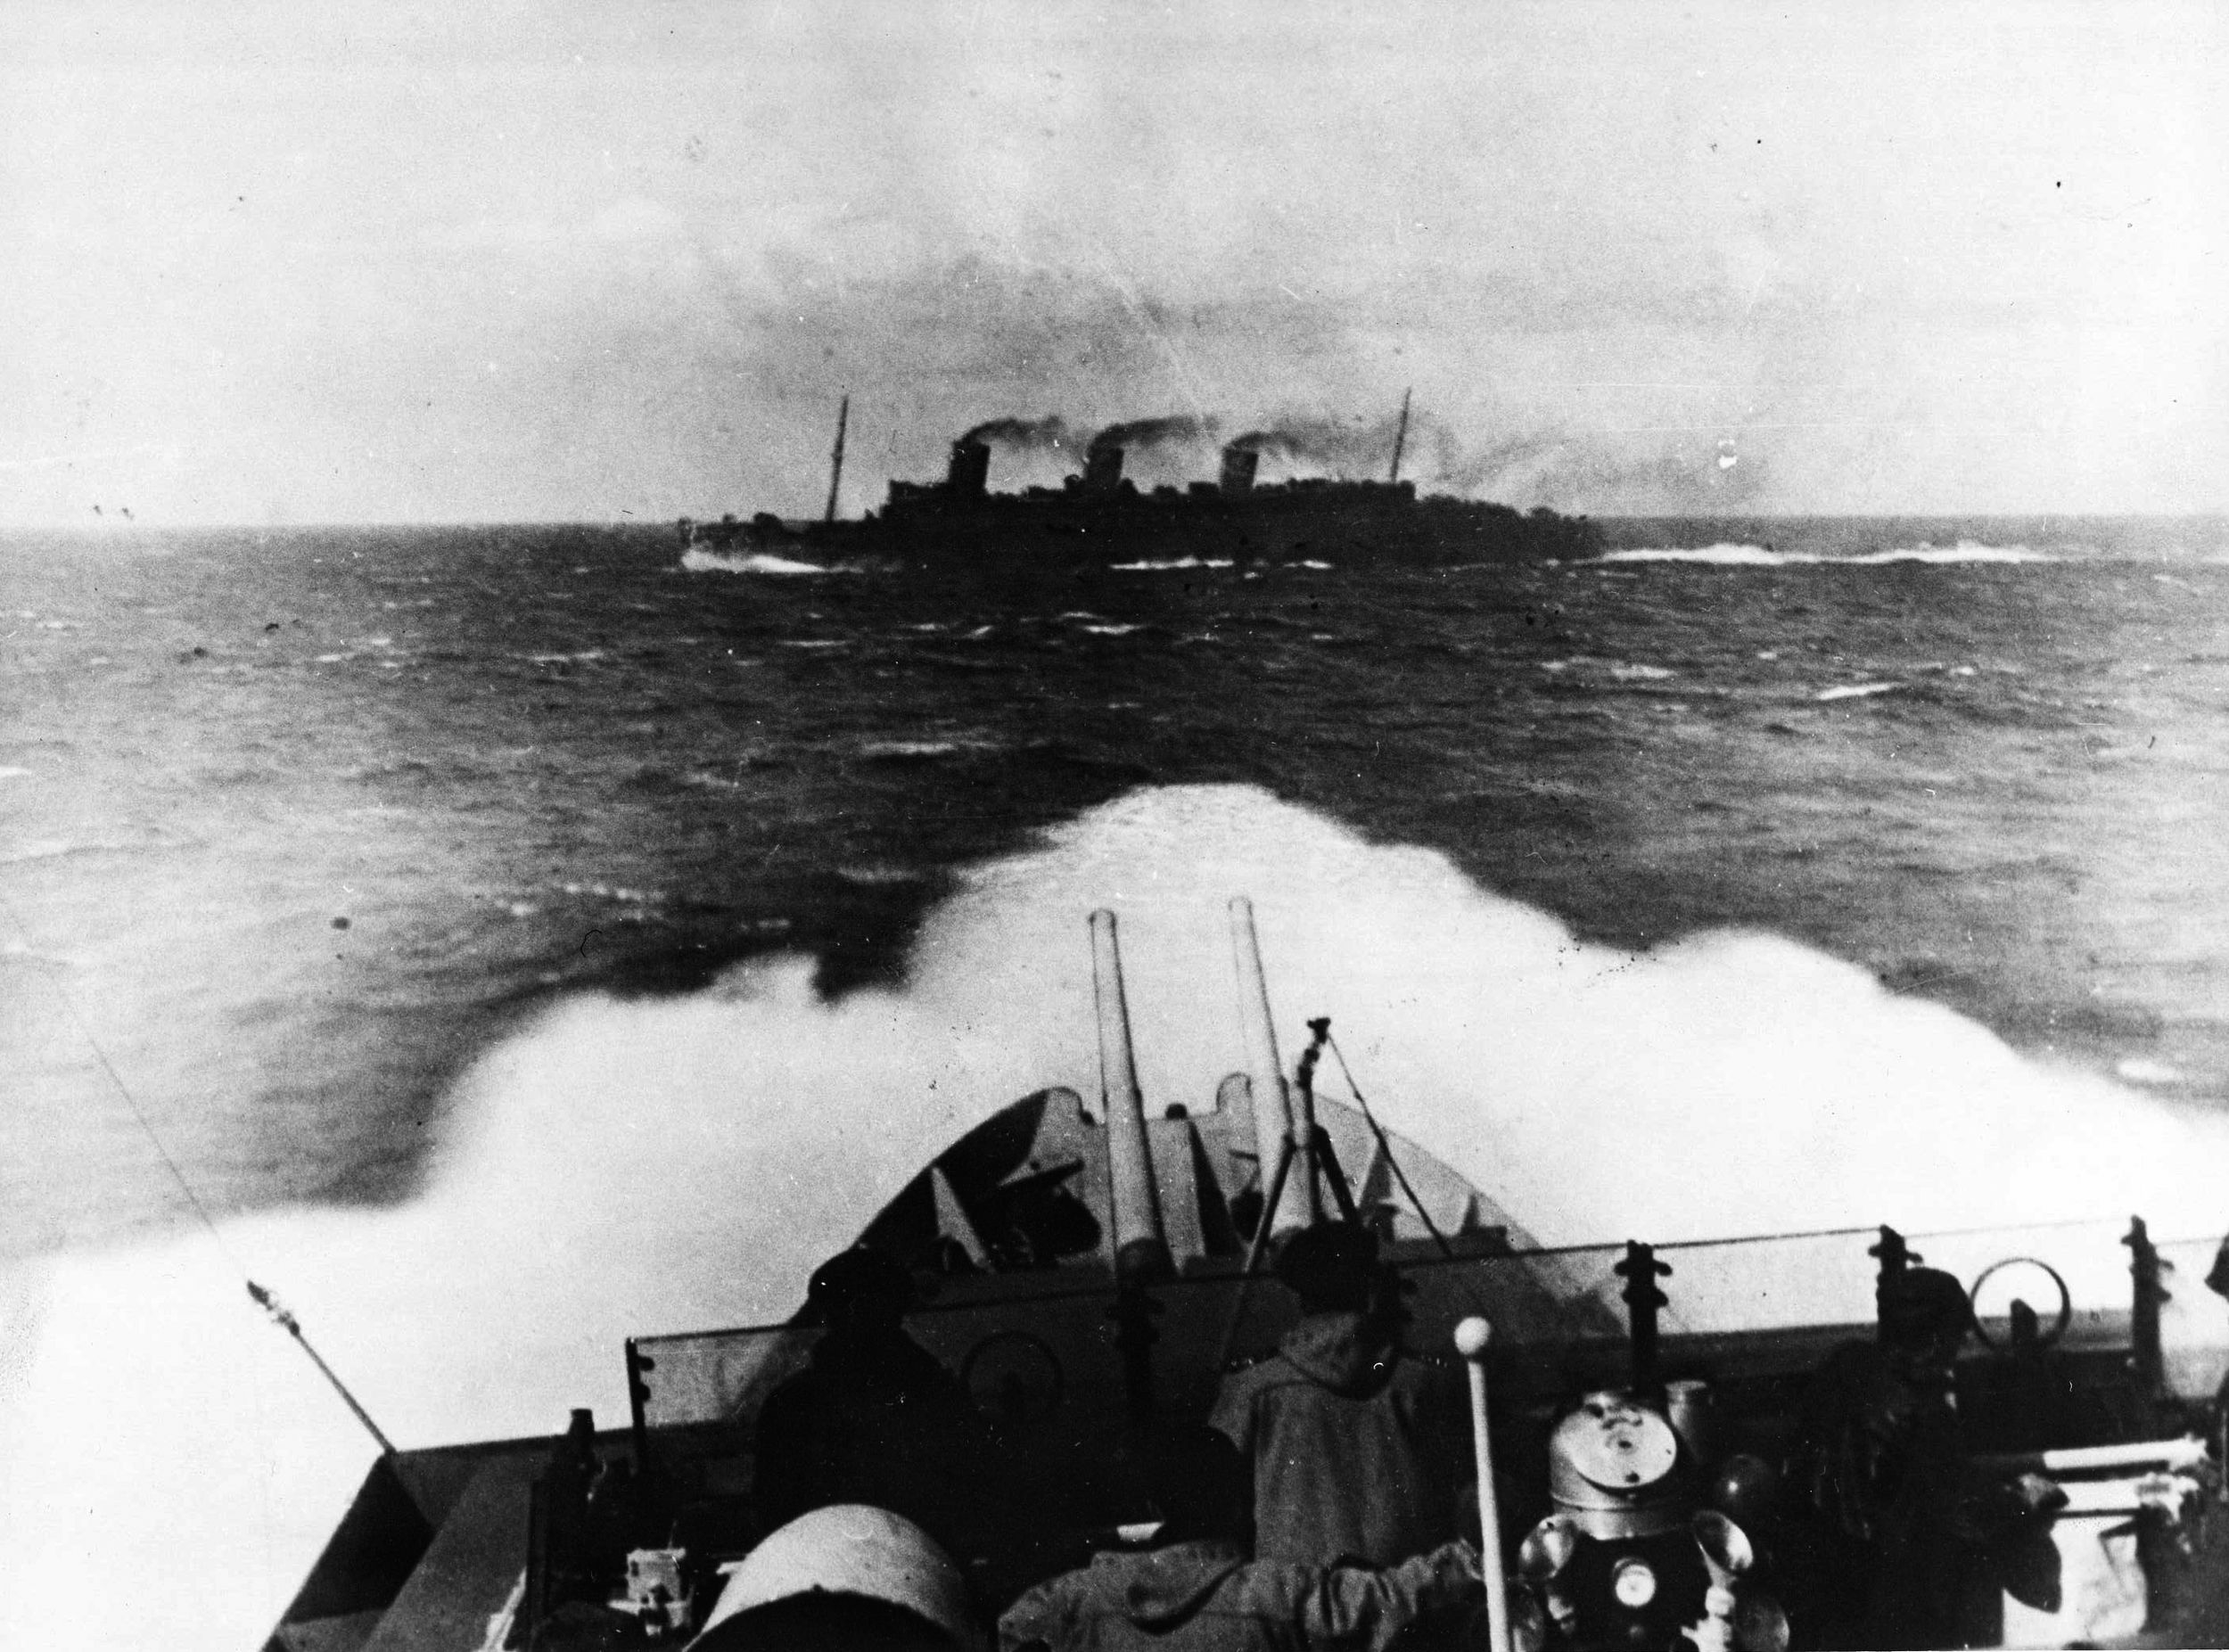 Seen from the bridge of the escorting British cruiser HMS Scylla, the Queen Mary slices through the waters of the Atlantic. During an unfortunate accident, the great liner collided with a Royal Navy warship, which quickly sank.